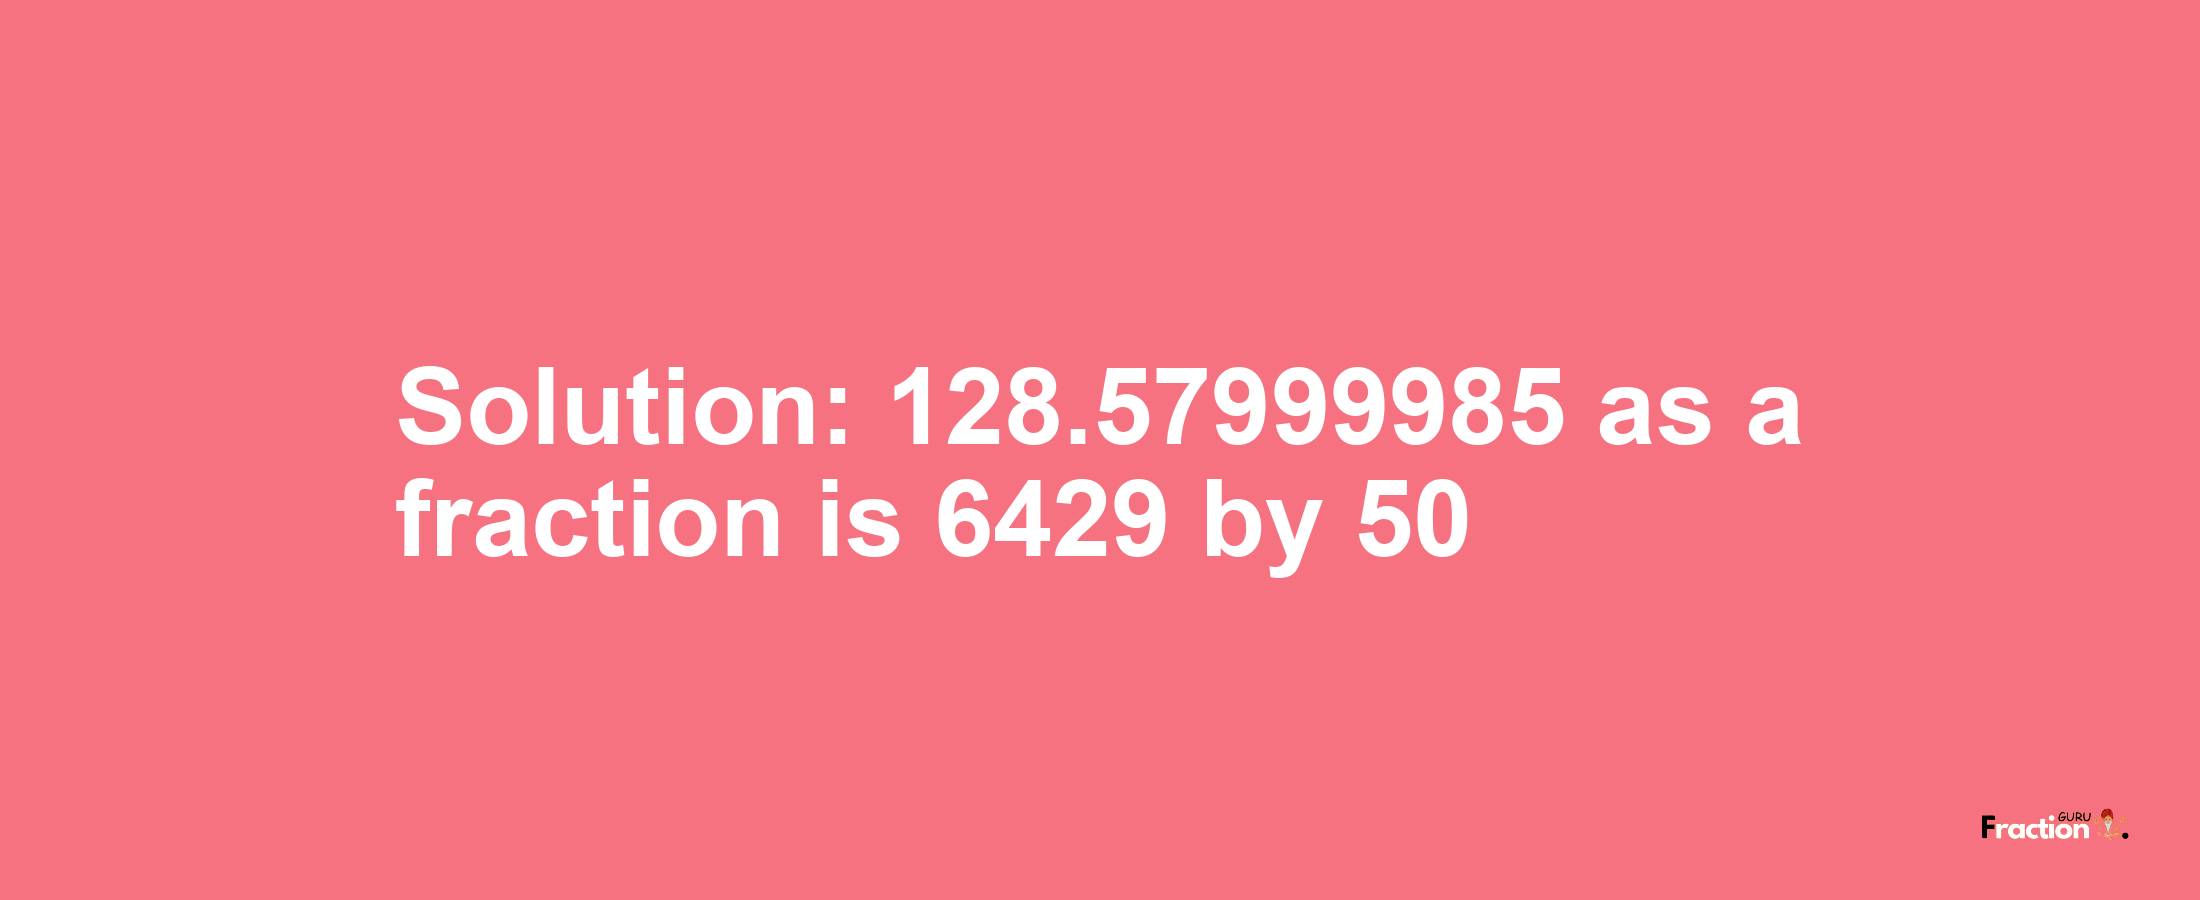 Solution:128.57999985 as a fraction is 6429/50